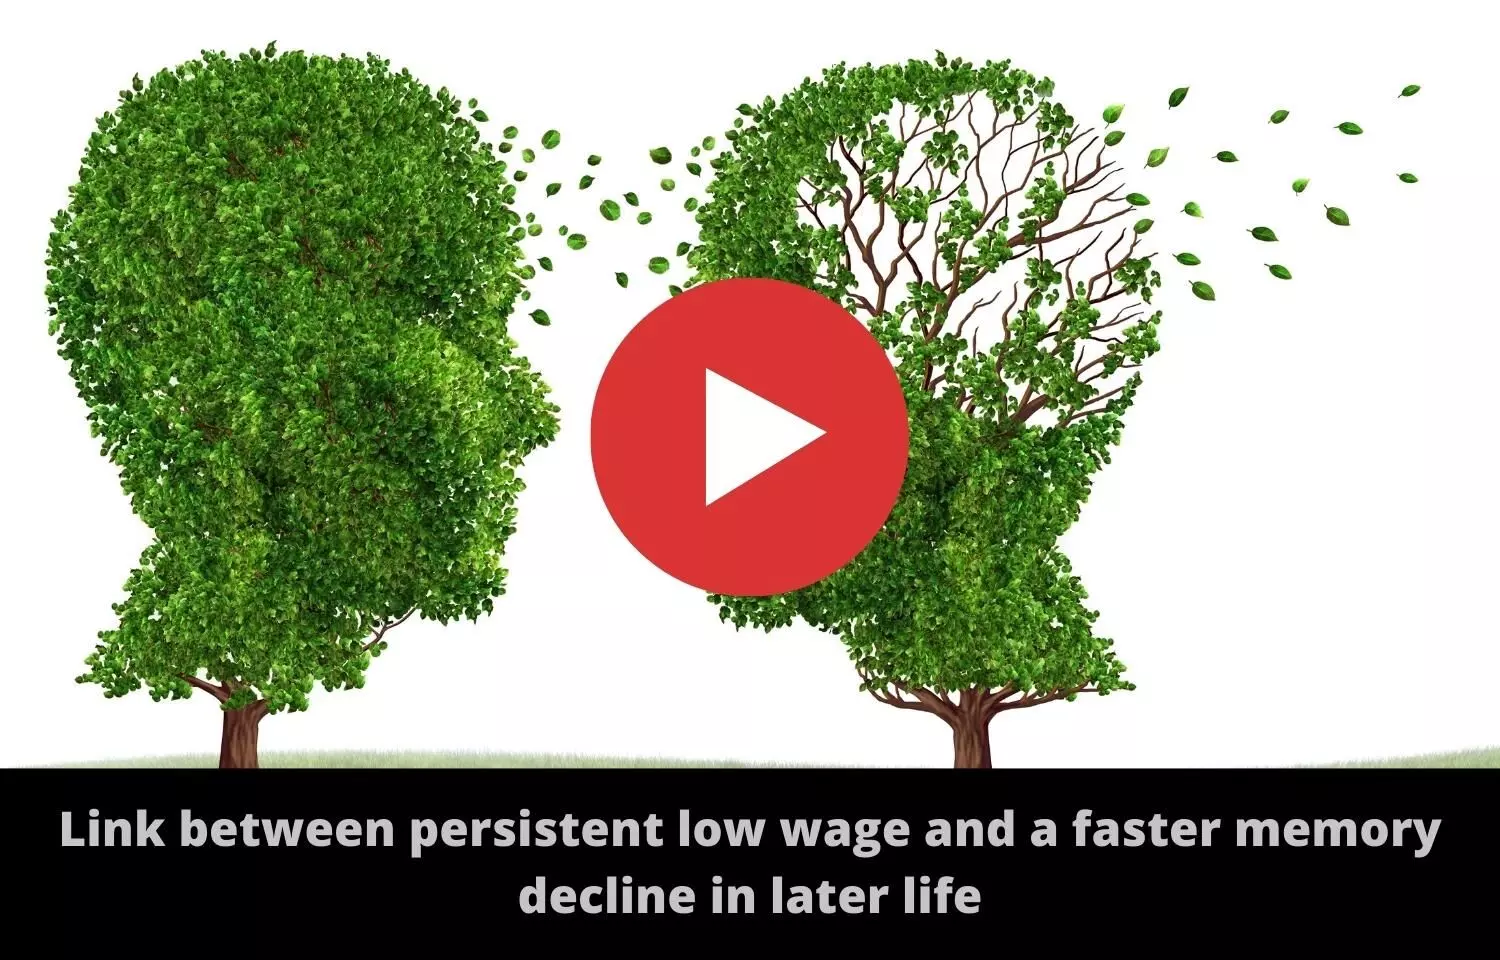 Link between persistent low wage and a faster memory decline in later life